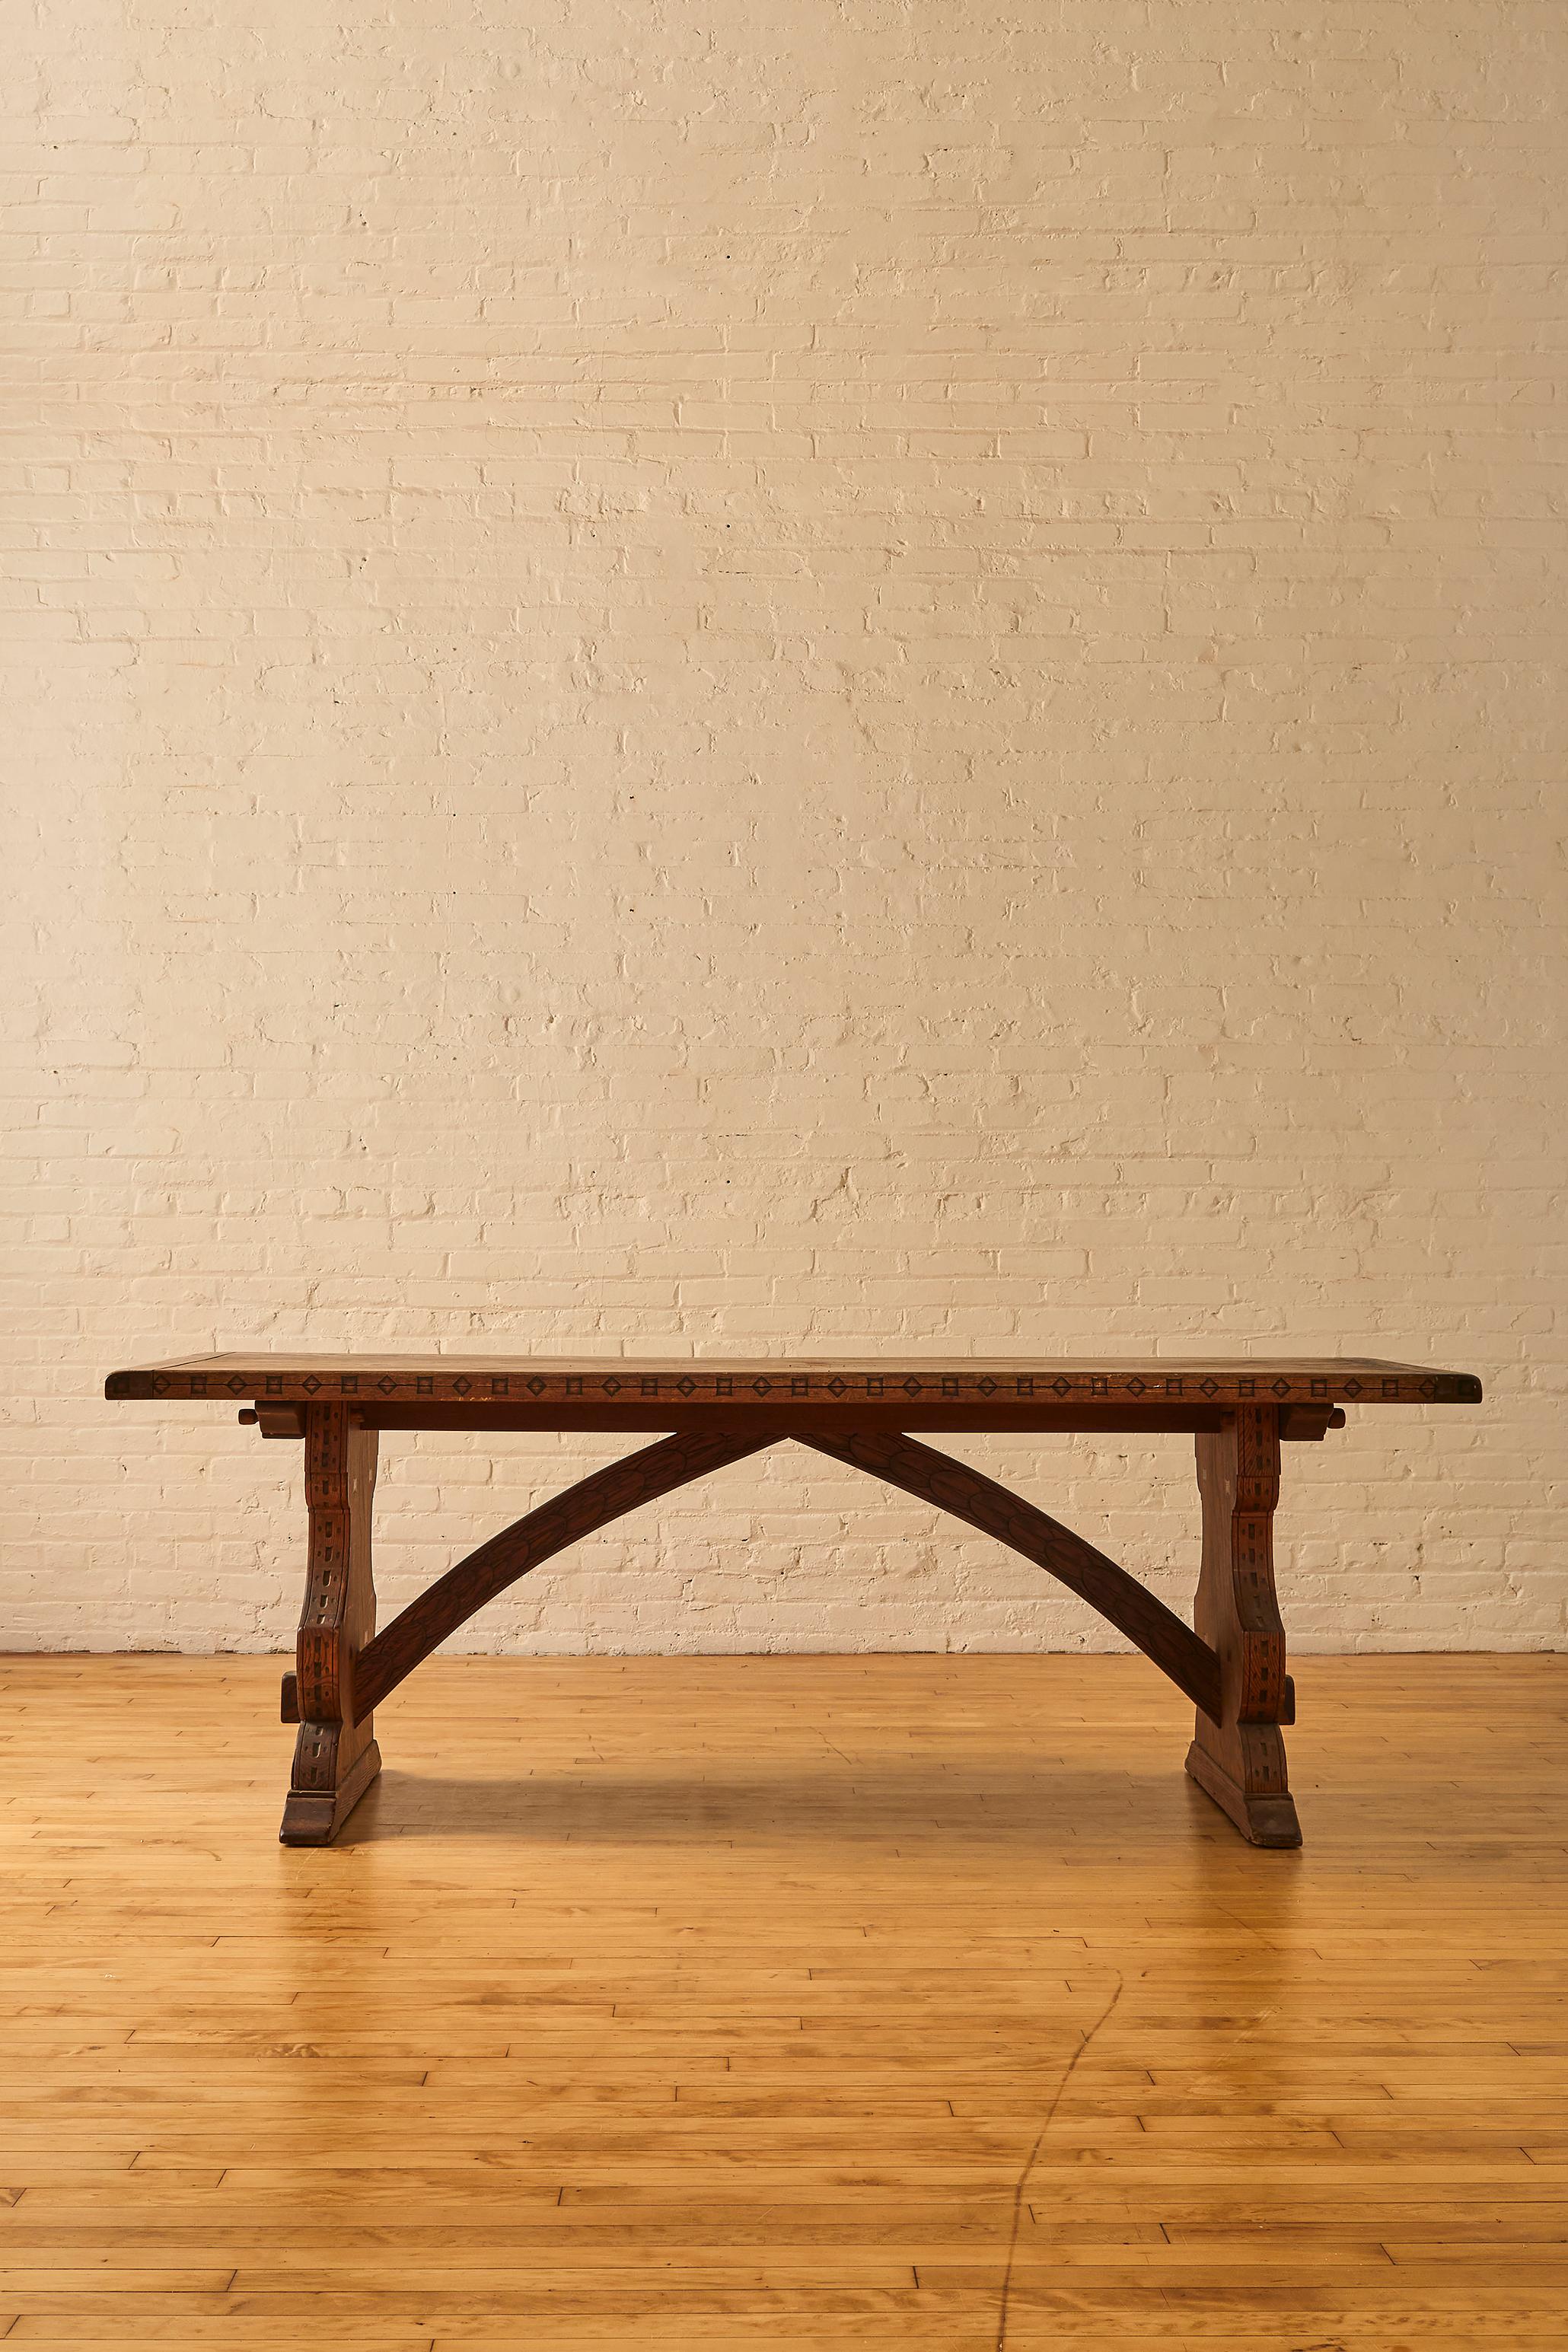 Gothic Motif Trestle dining table. 

